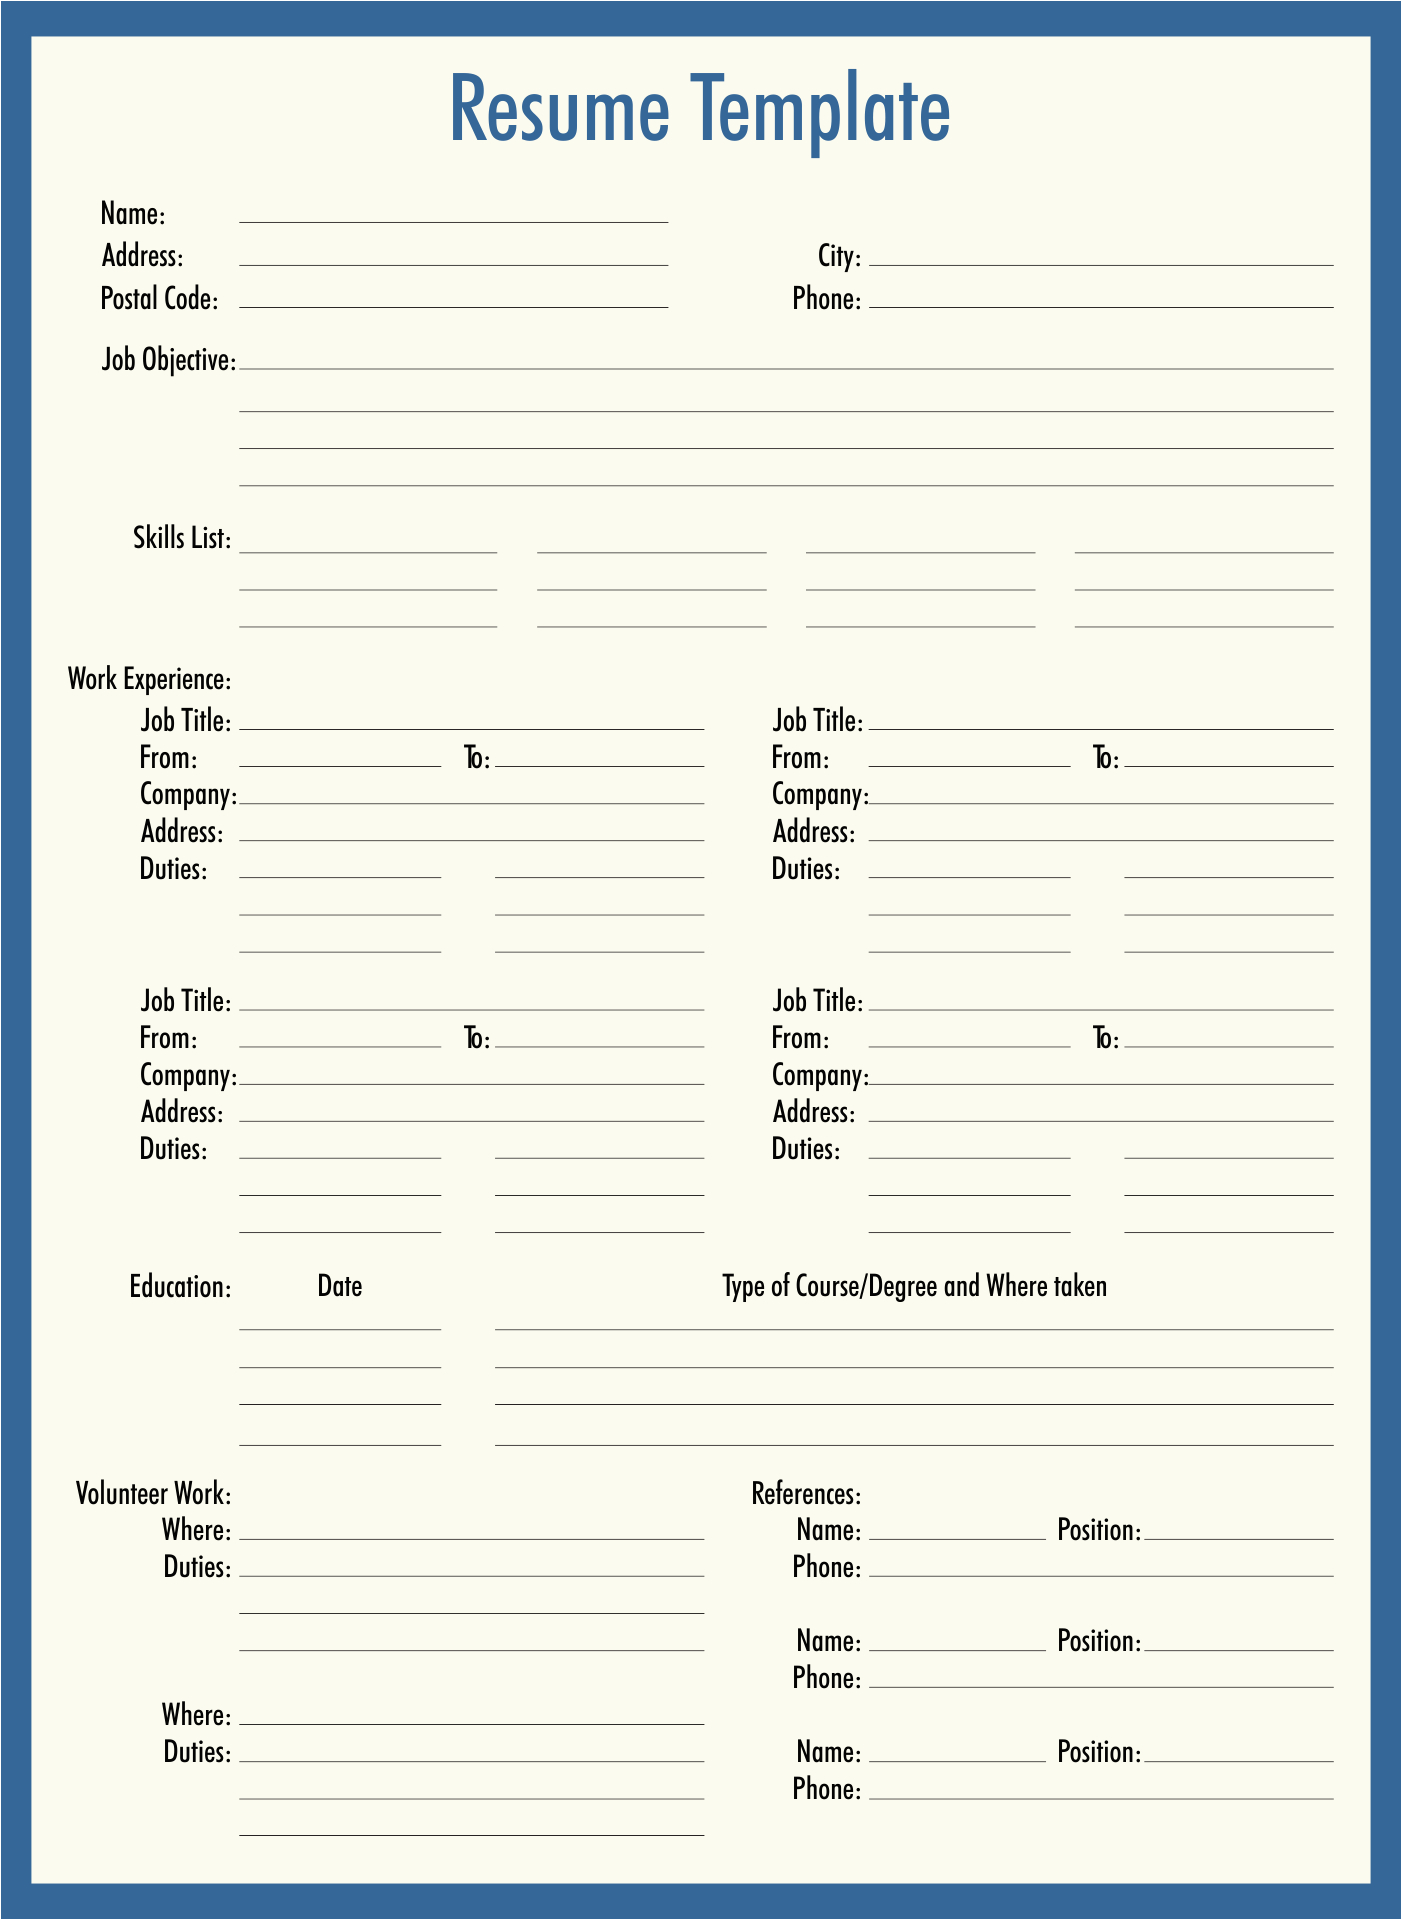 Resume Templates Fill In the Blanks Free 7 Best Of Fill In Blank Printable Resume Free